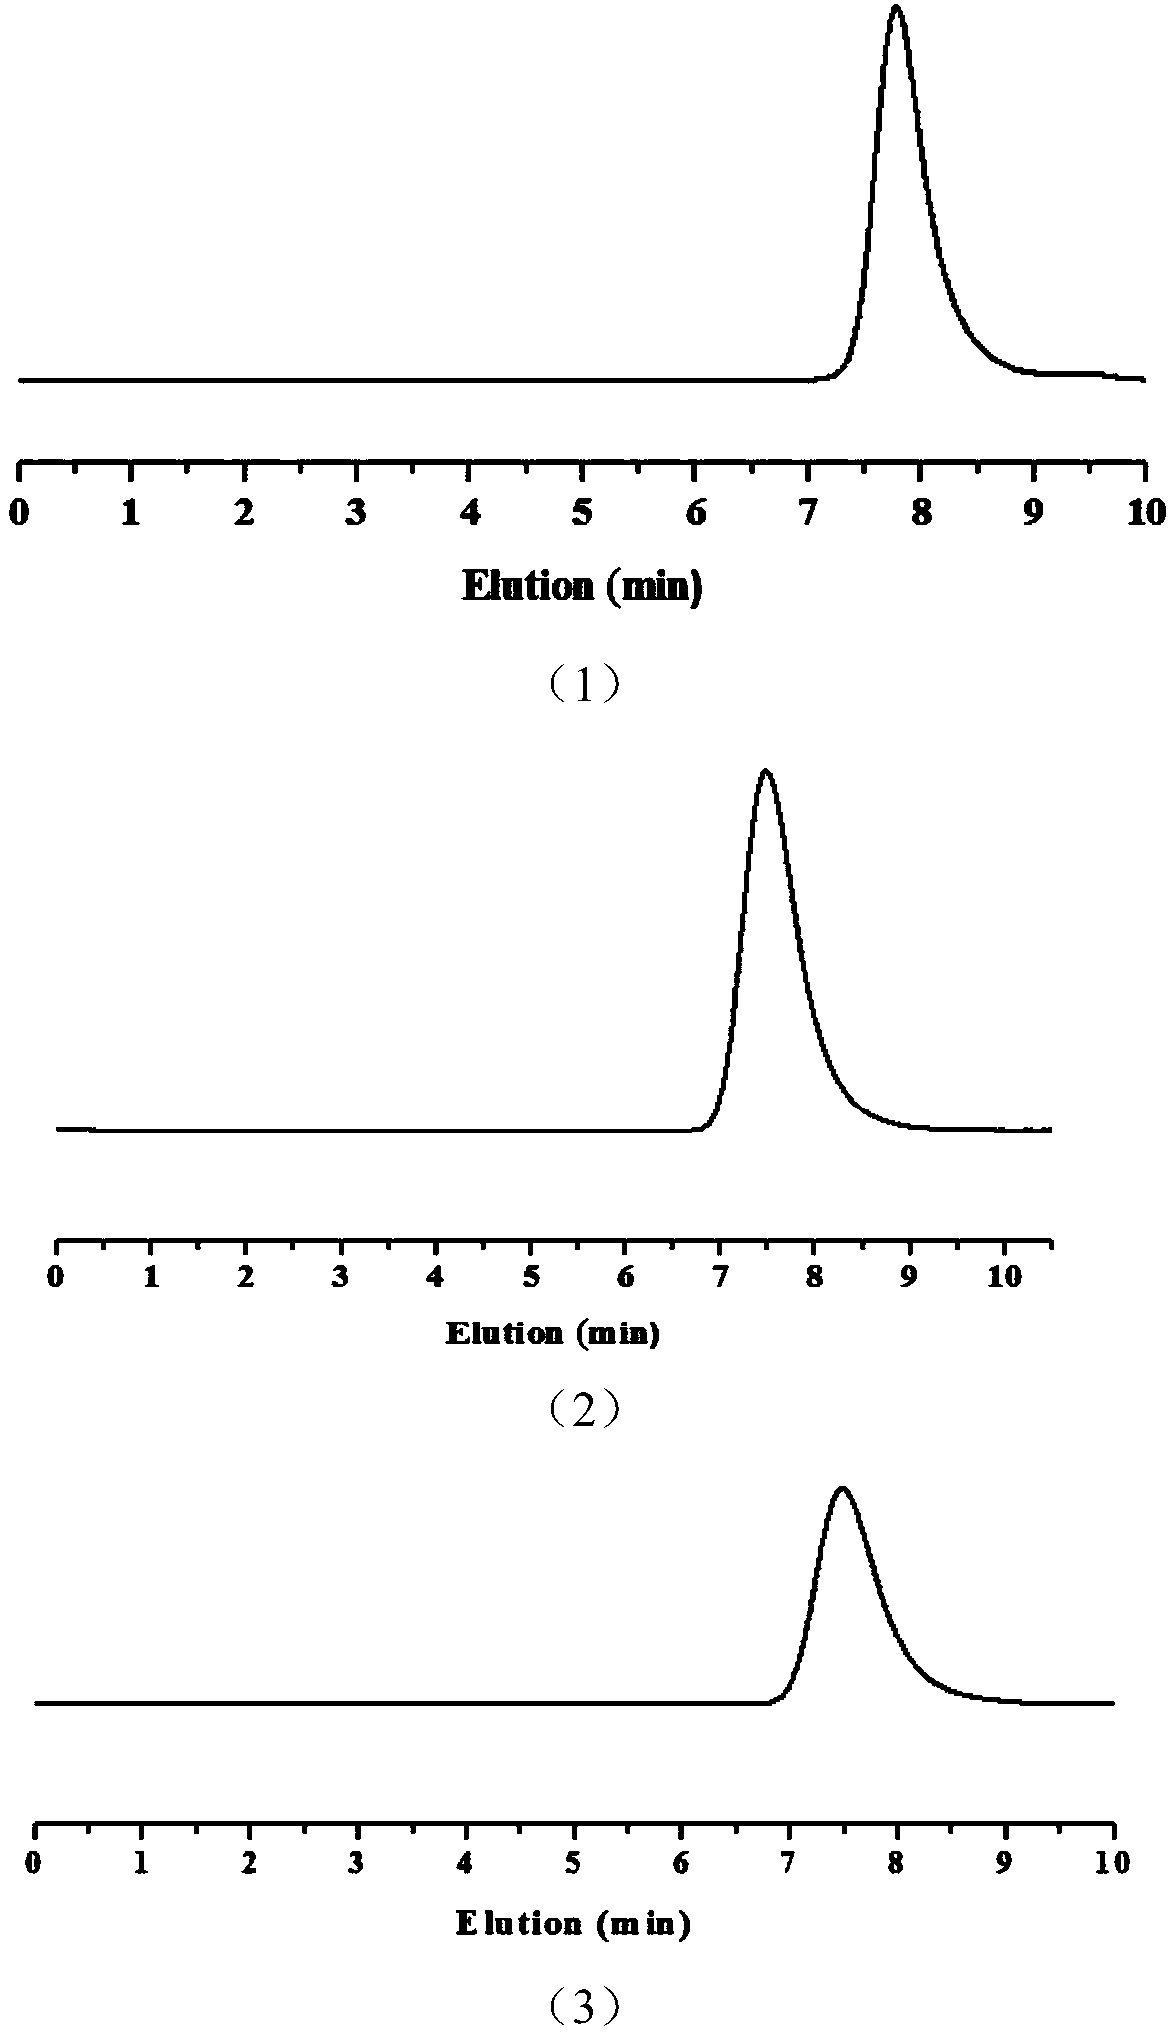 Method for preparing PMMA with high molecular weight and narrow molecular weight distribution